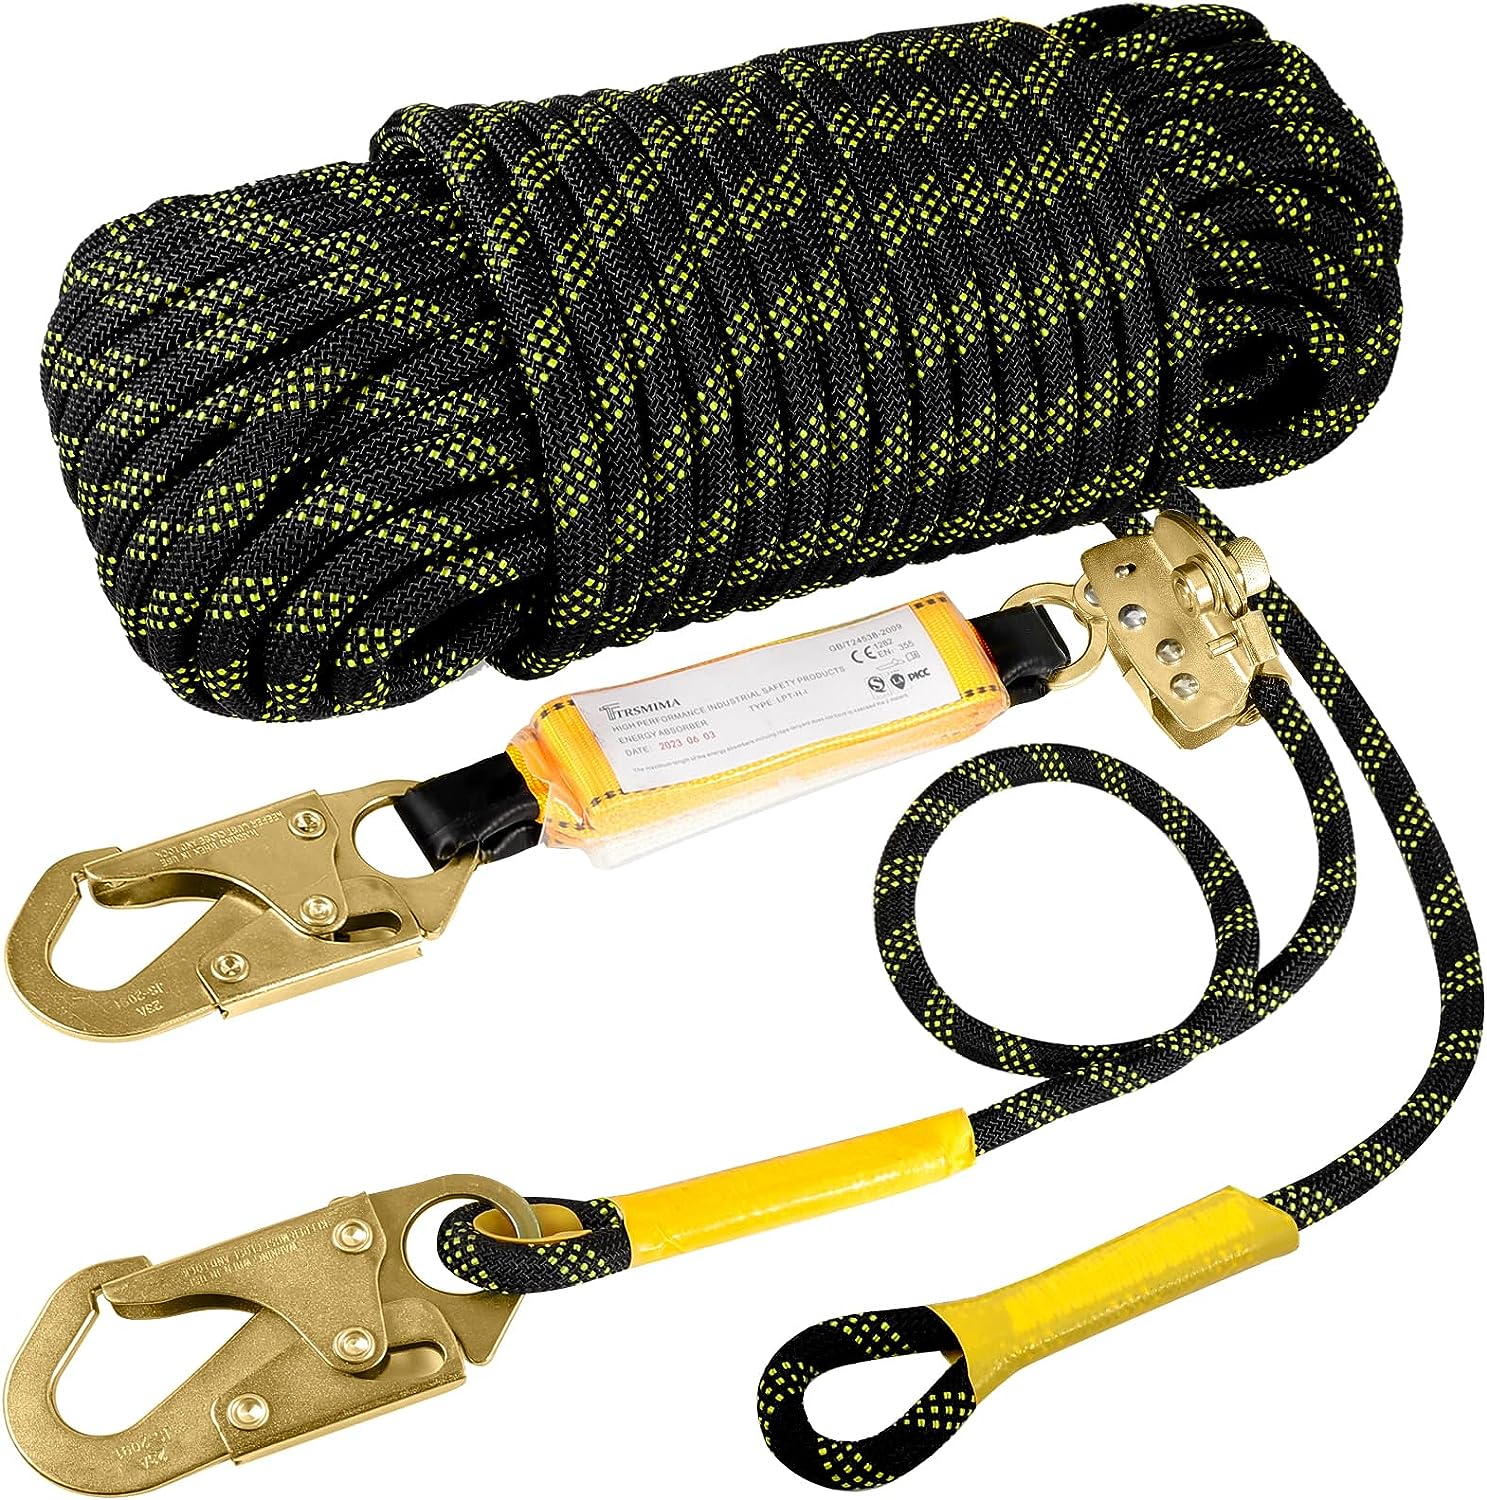 Top 6 Fall Protection Ropes for Enhanced Safety